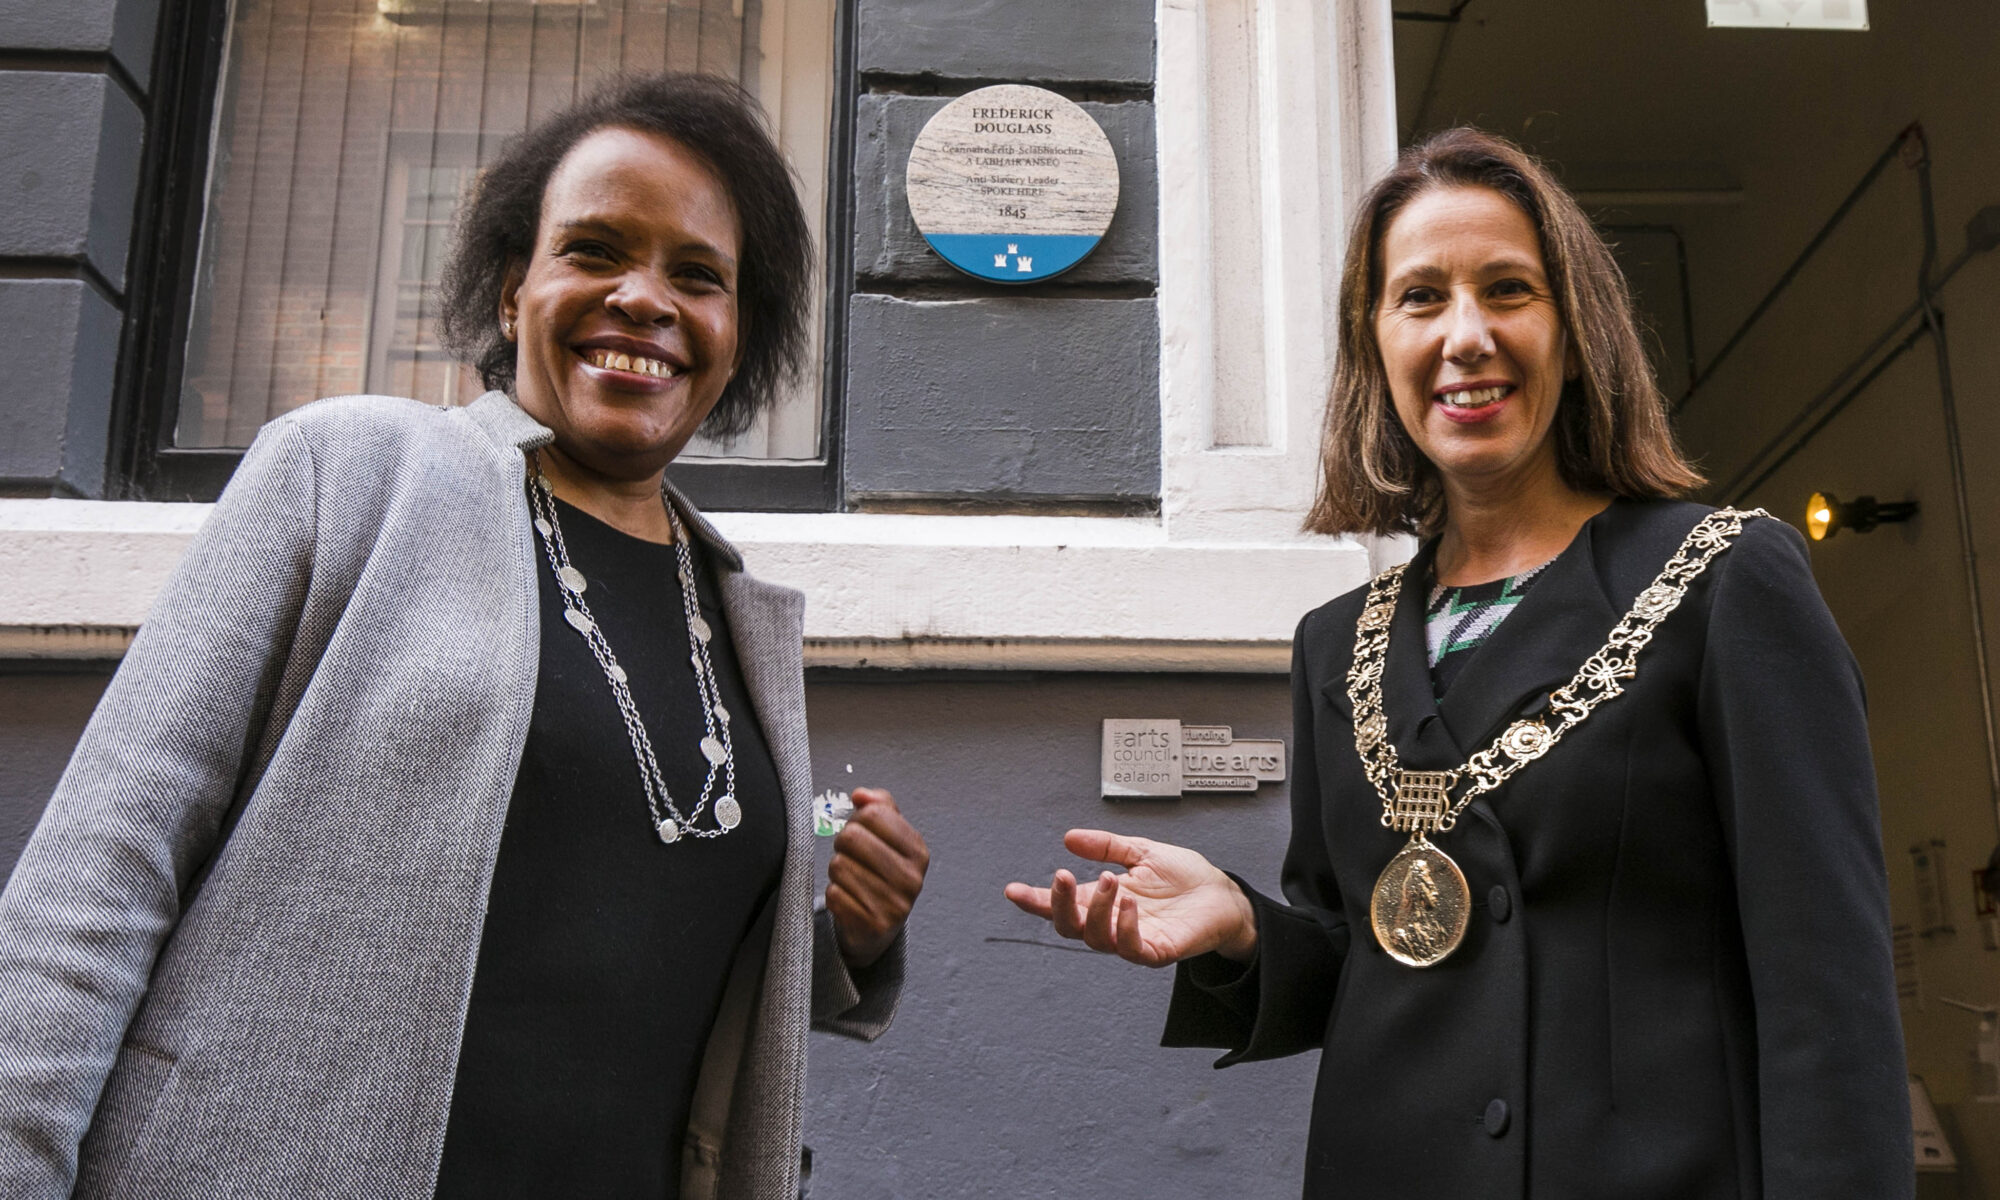 Cecelia Hartsell and Lord Mayor Alison Gilliland at the unveiling of the Frederick Douglass plaque